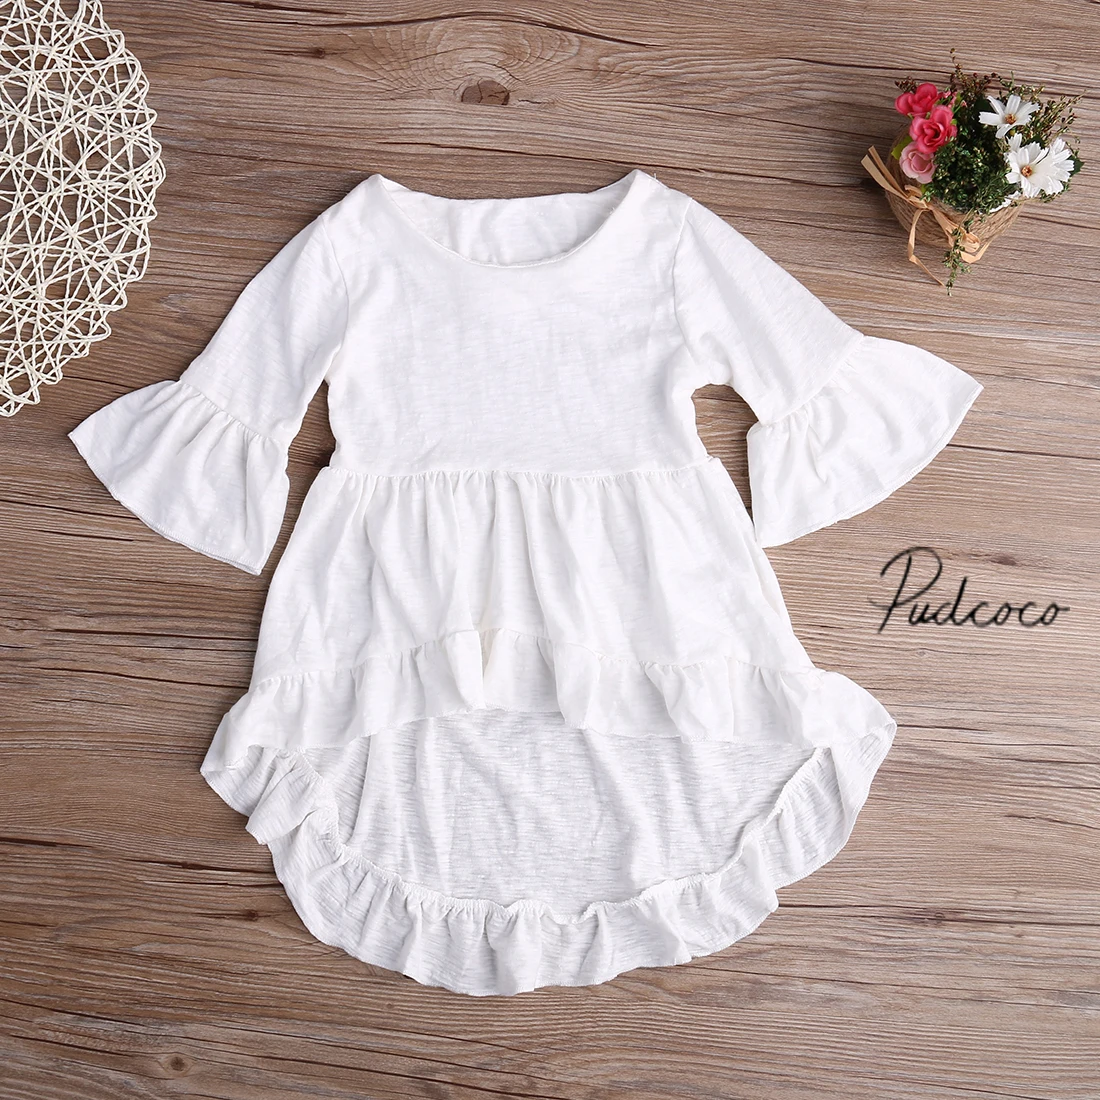 HOT Toddler White Top Shirts Kids Girl Summer Frills Flare Sleeve Top ...